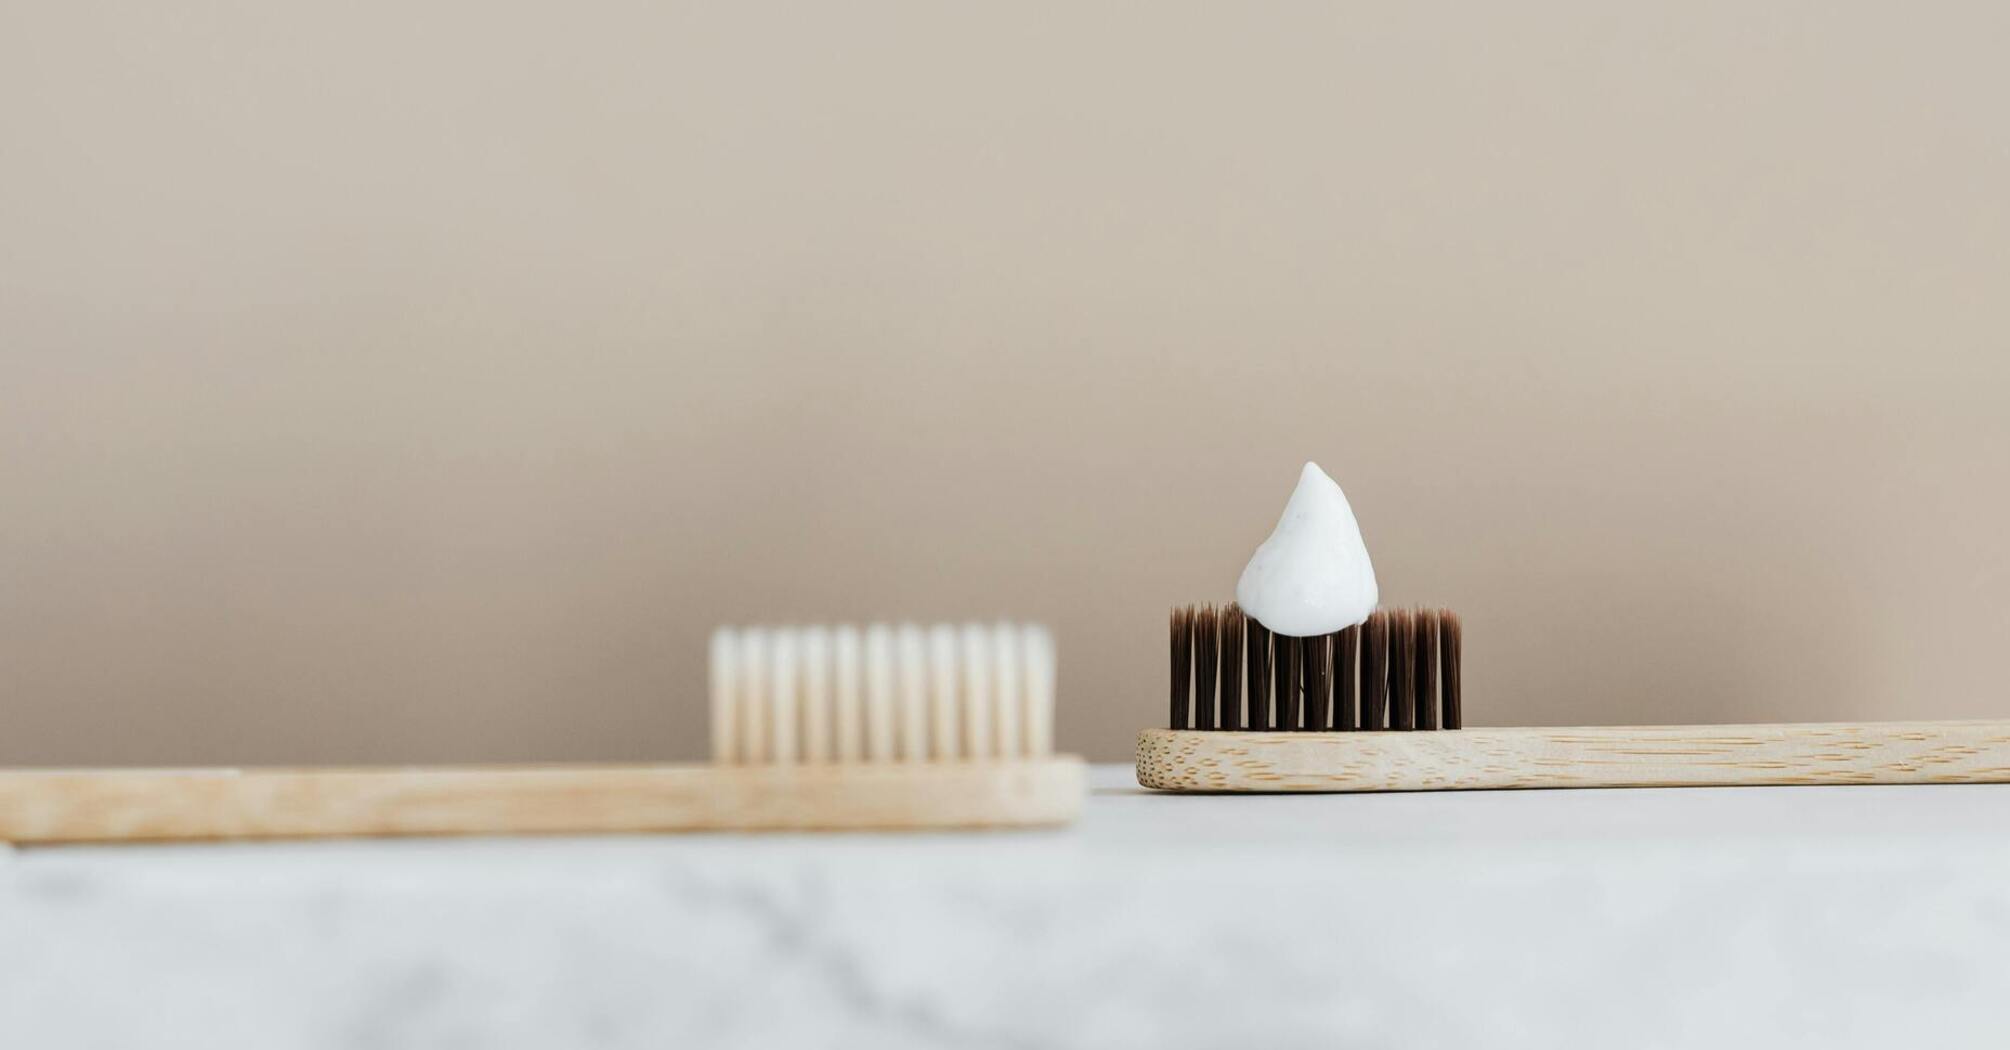 How to use old toothbrushes in everyday life: 5 useful tips